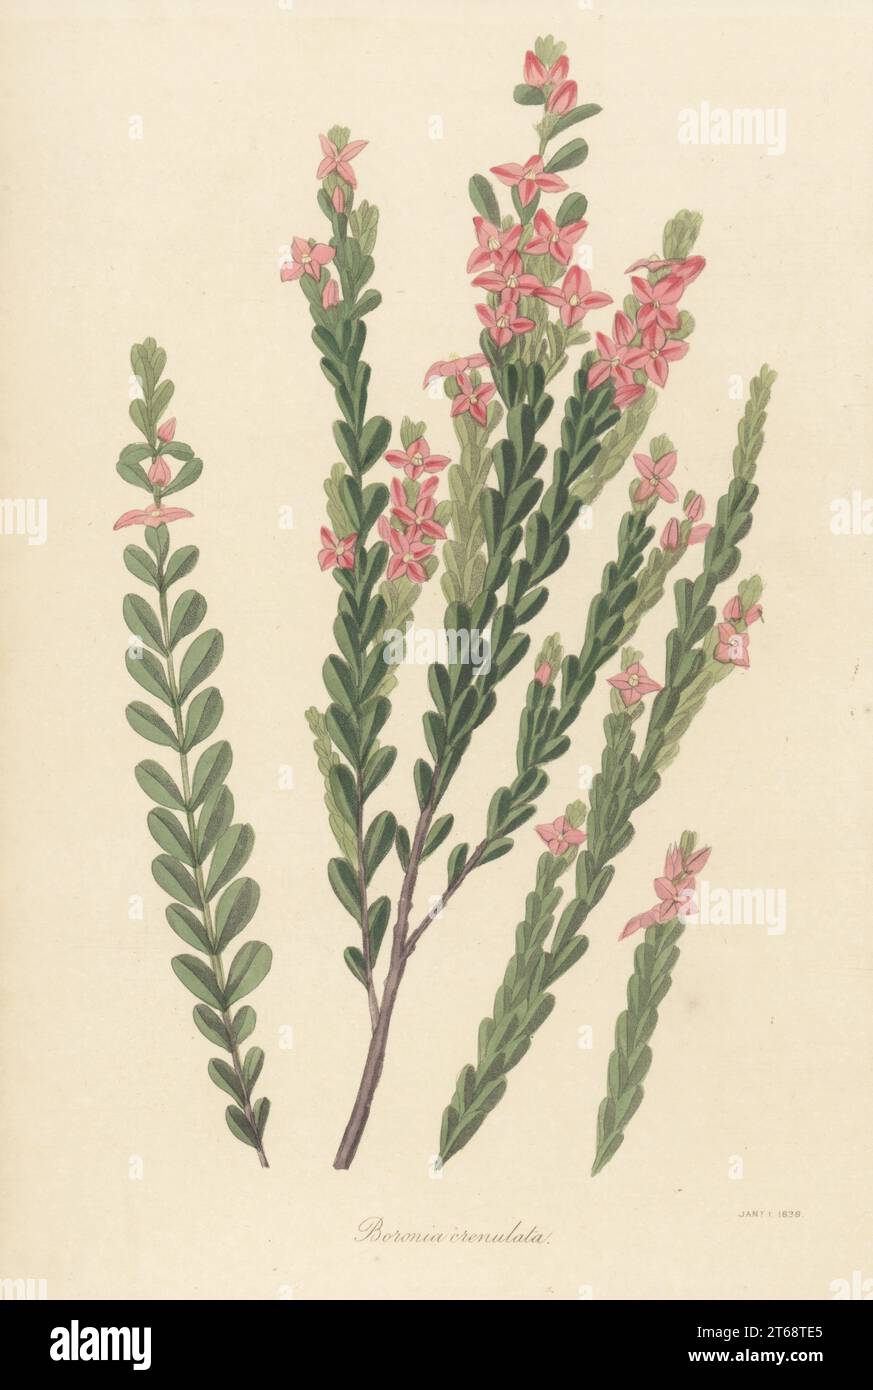 Aniseed boronia or crenulate-leaved boronia, Boronia crenulata. Native to Western Australia, found by Scottish botanist Archibald Menzies at King George's Sound, and described by English botanist James Edward Smith in 1807. Handcoloured engraving from Joseph Paxtons Magazine of Botany, and Register of Flowering Plants, Volume 4, Orr and Smith, London, 1837. Stock Photo